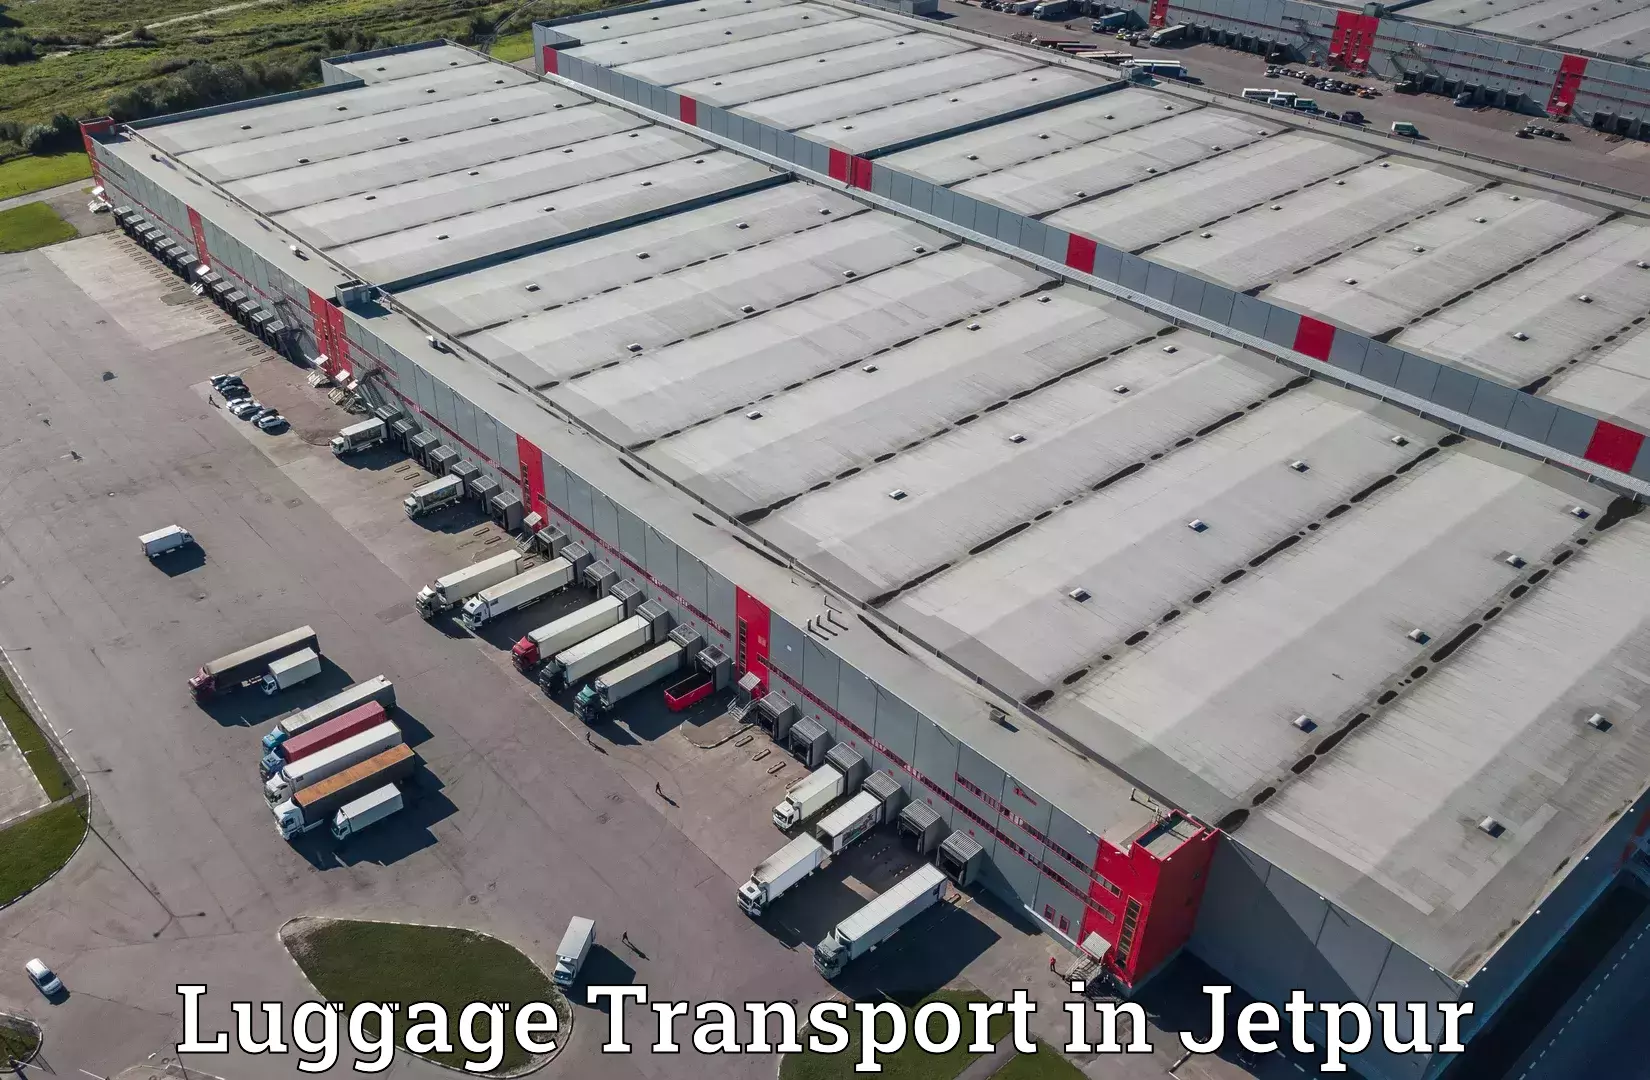 Luggage delivery operations in Jetpur